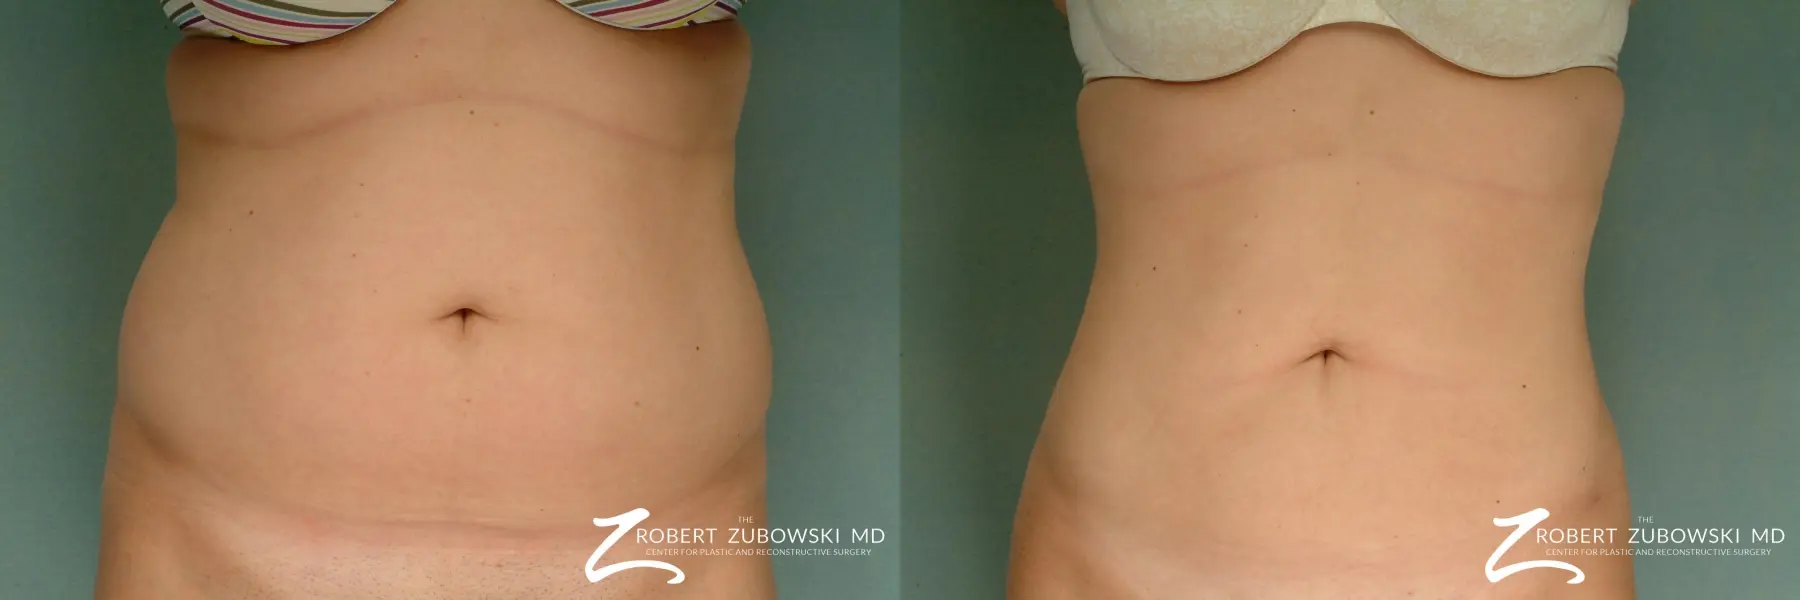 Liposuction: Patient 15 - Before and After 1